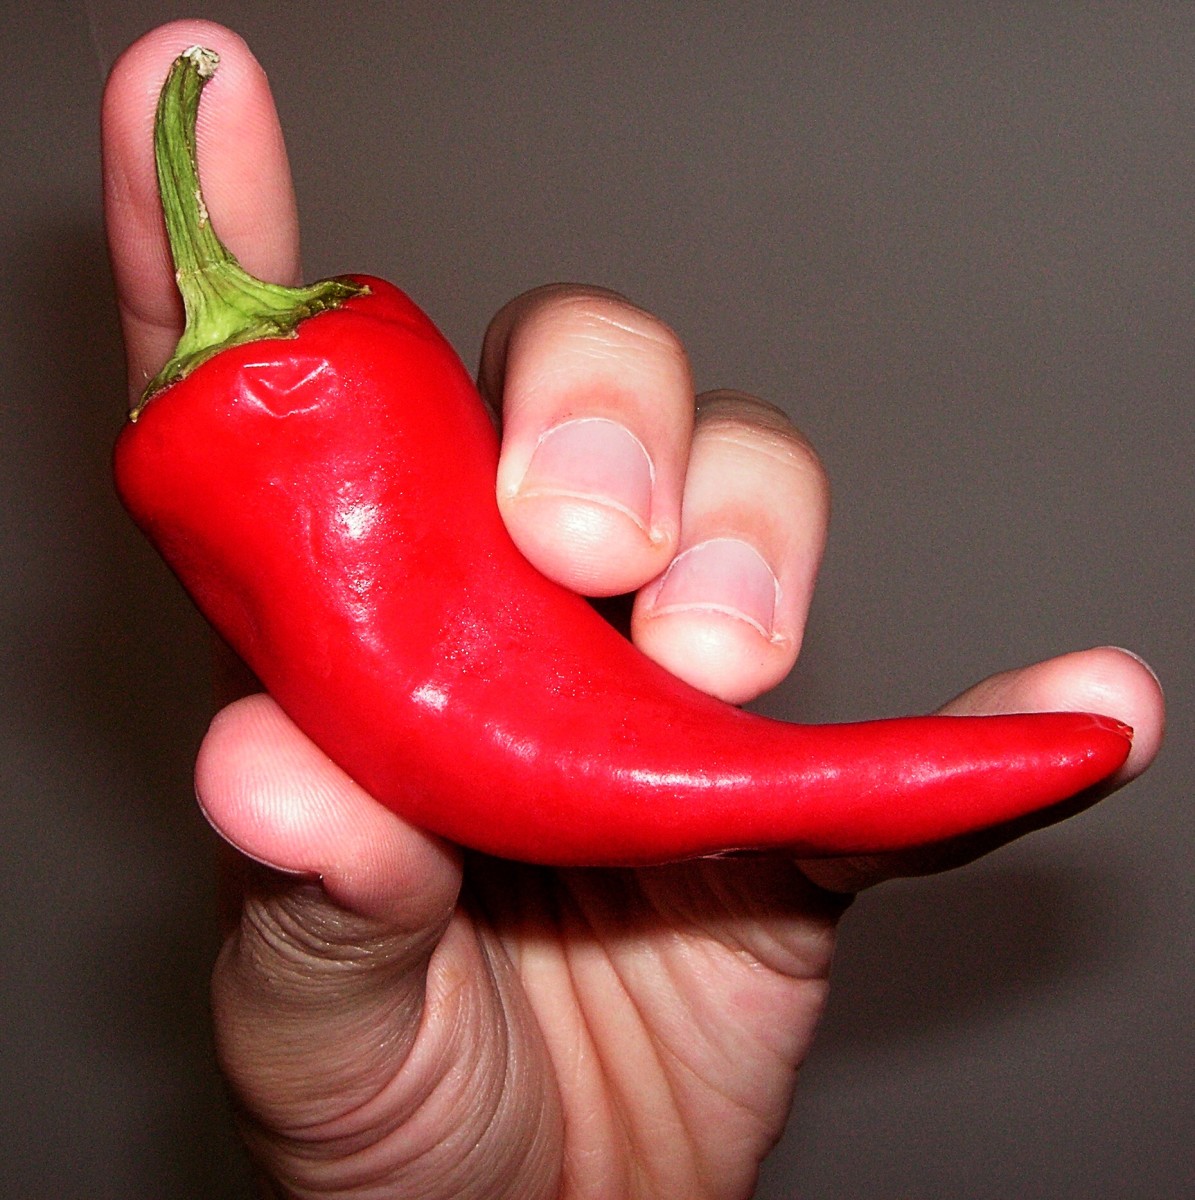 Hot and spicy foods like chili peppers can irritate the tongue.